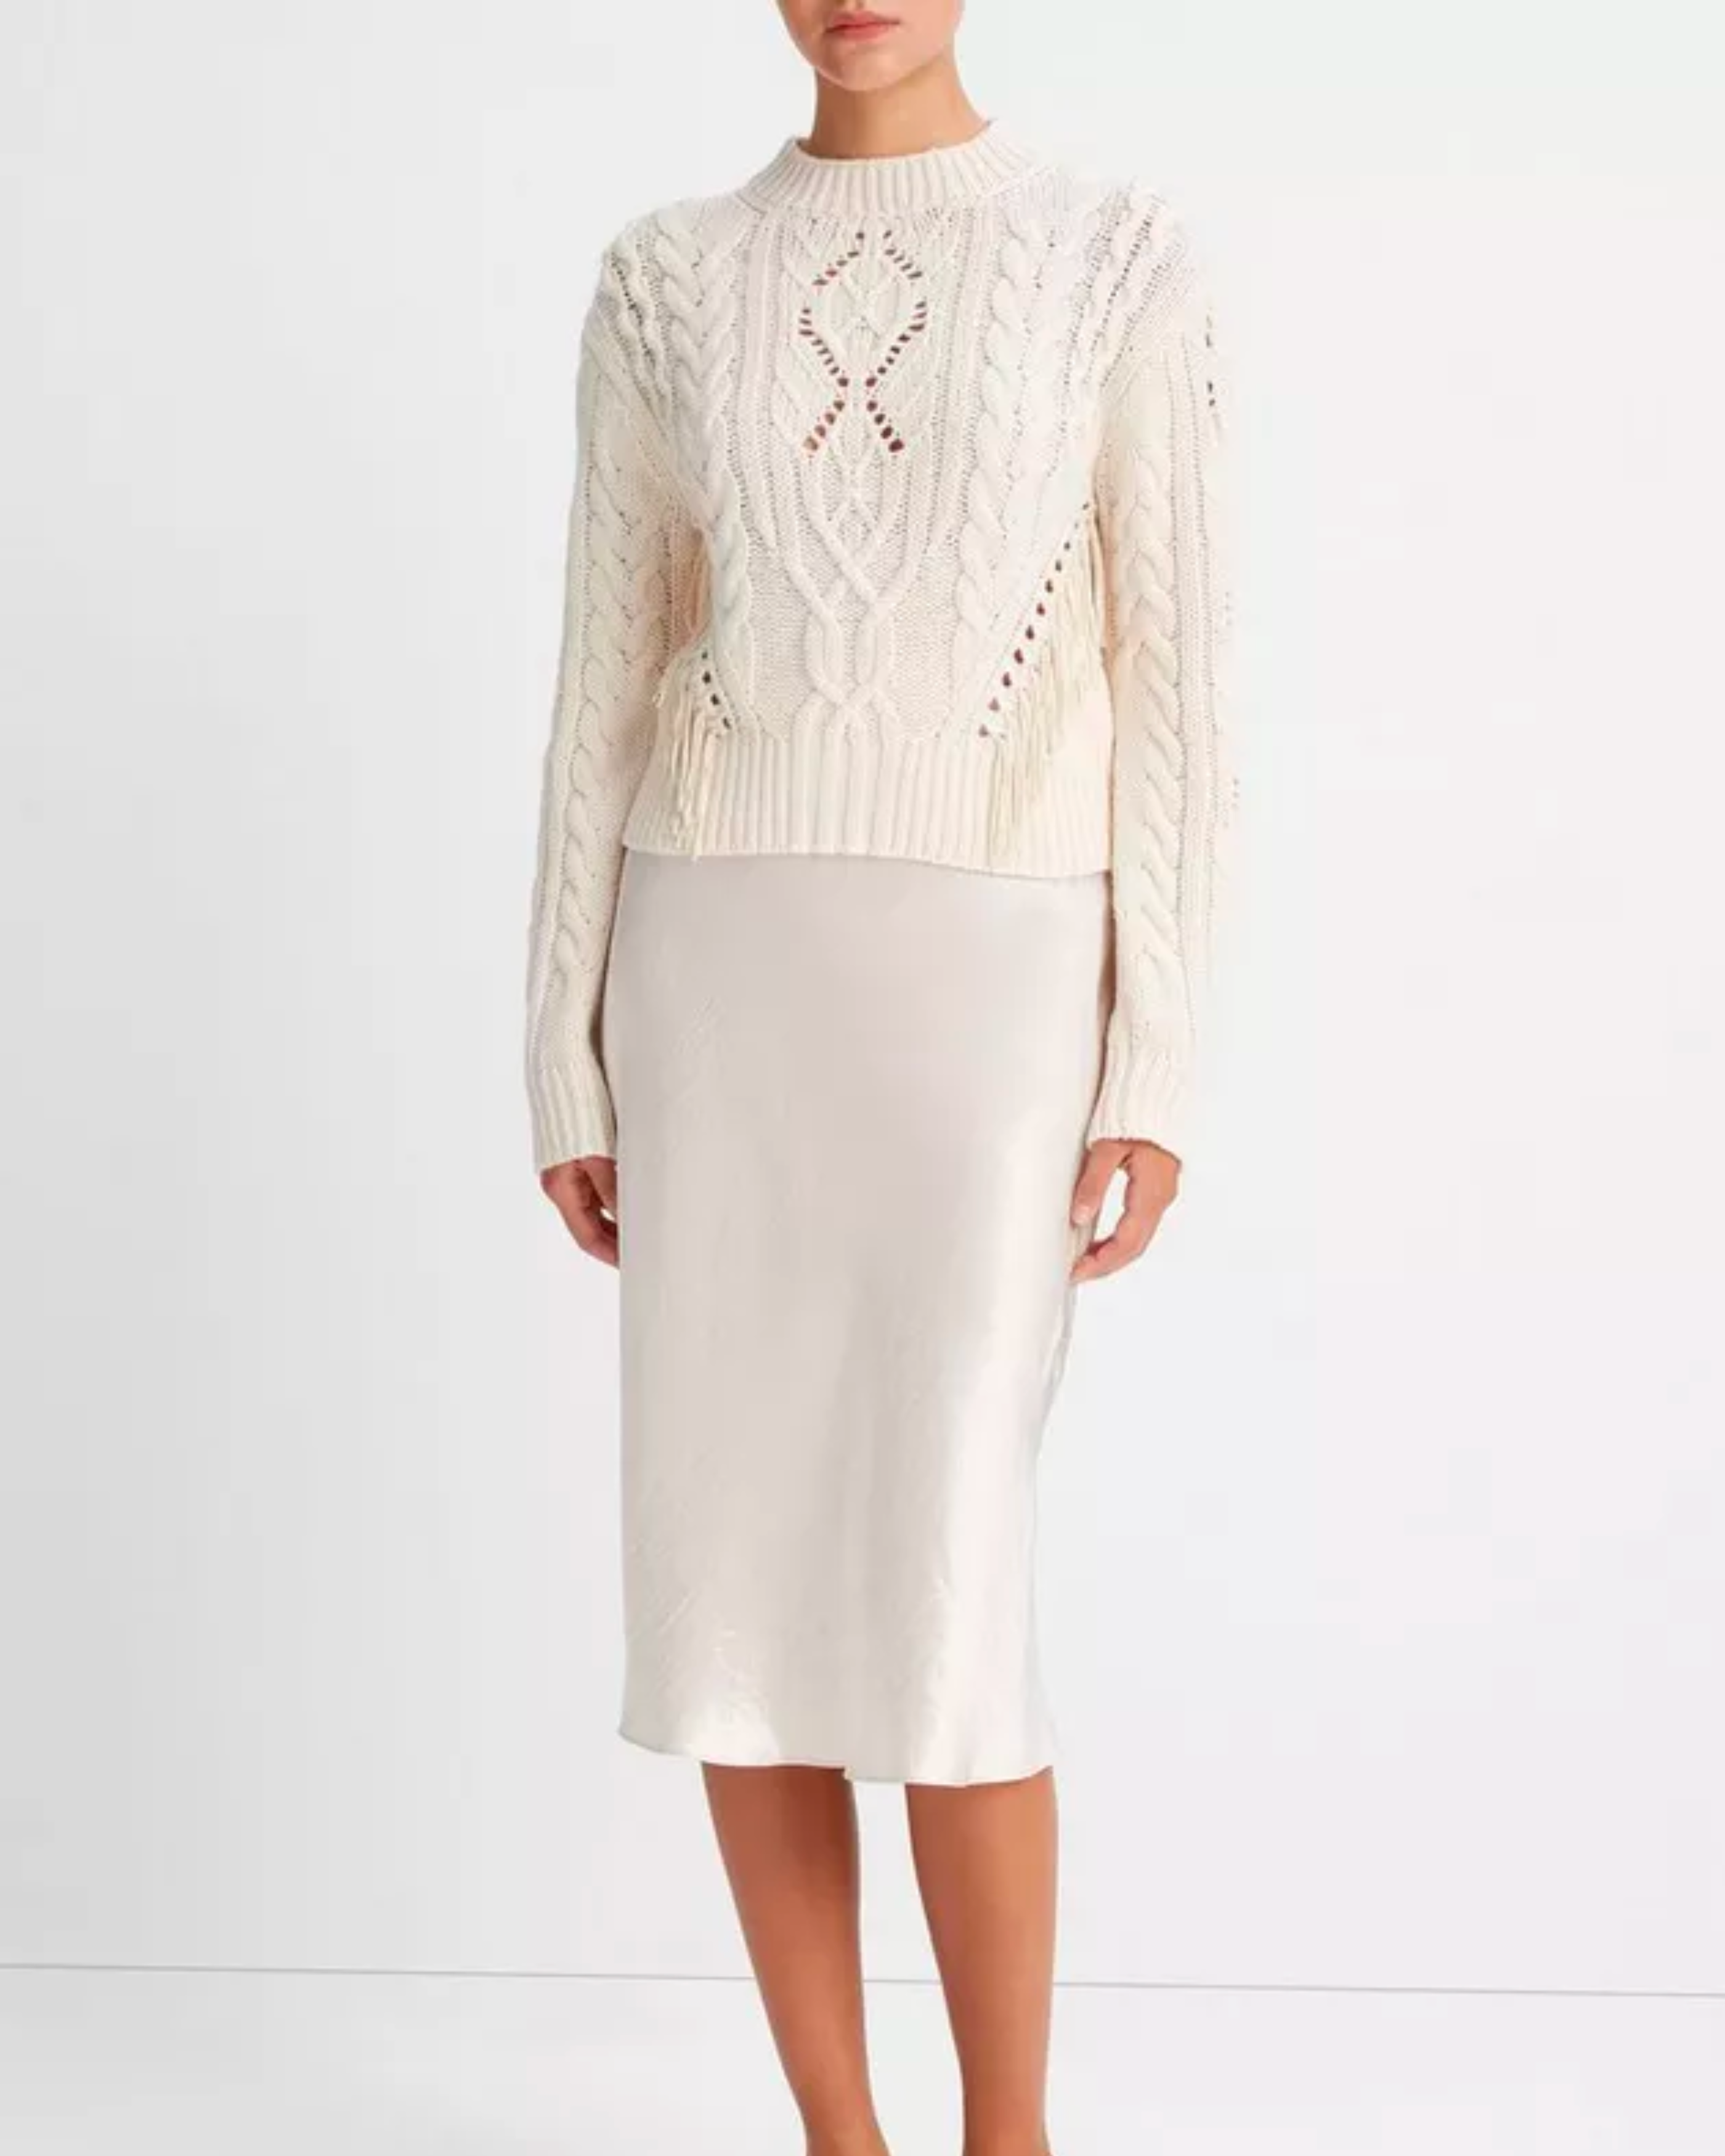 Vince Fringe Cable Sweater in Cream